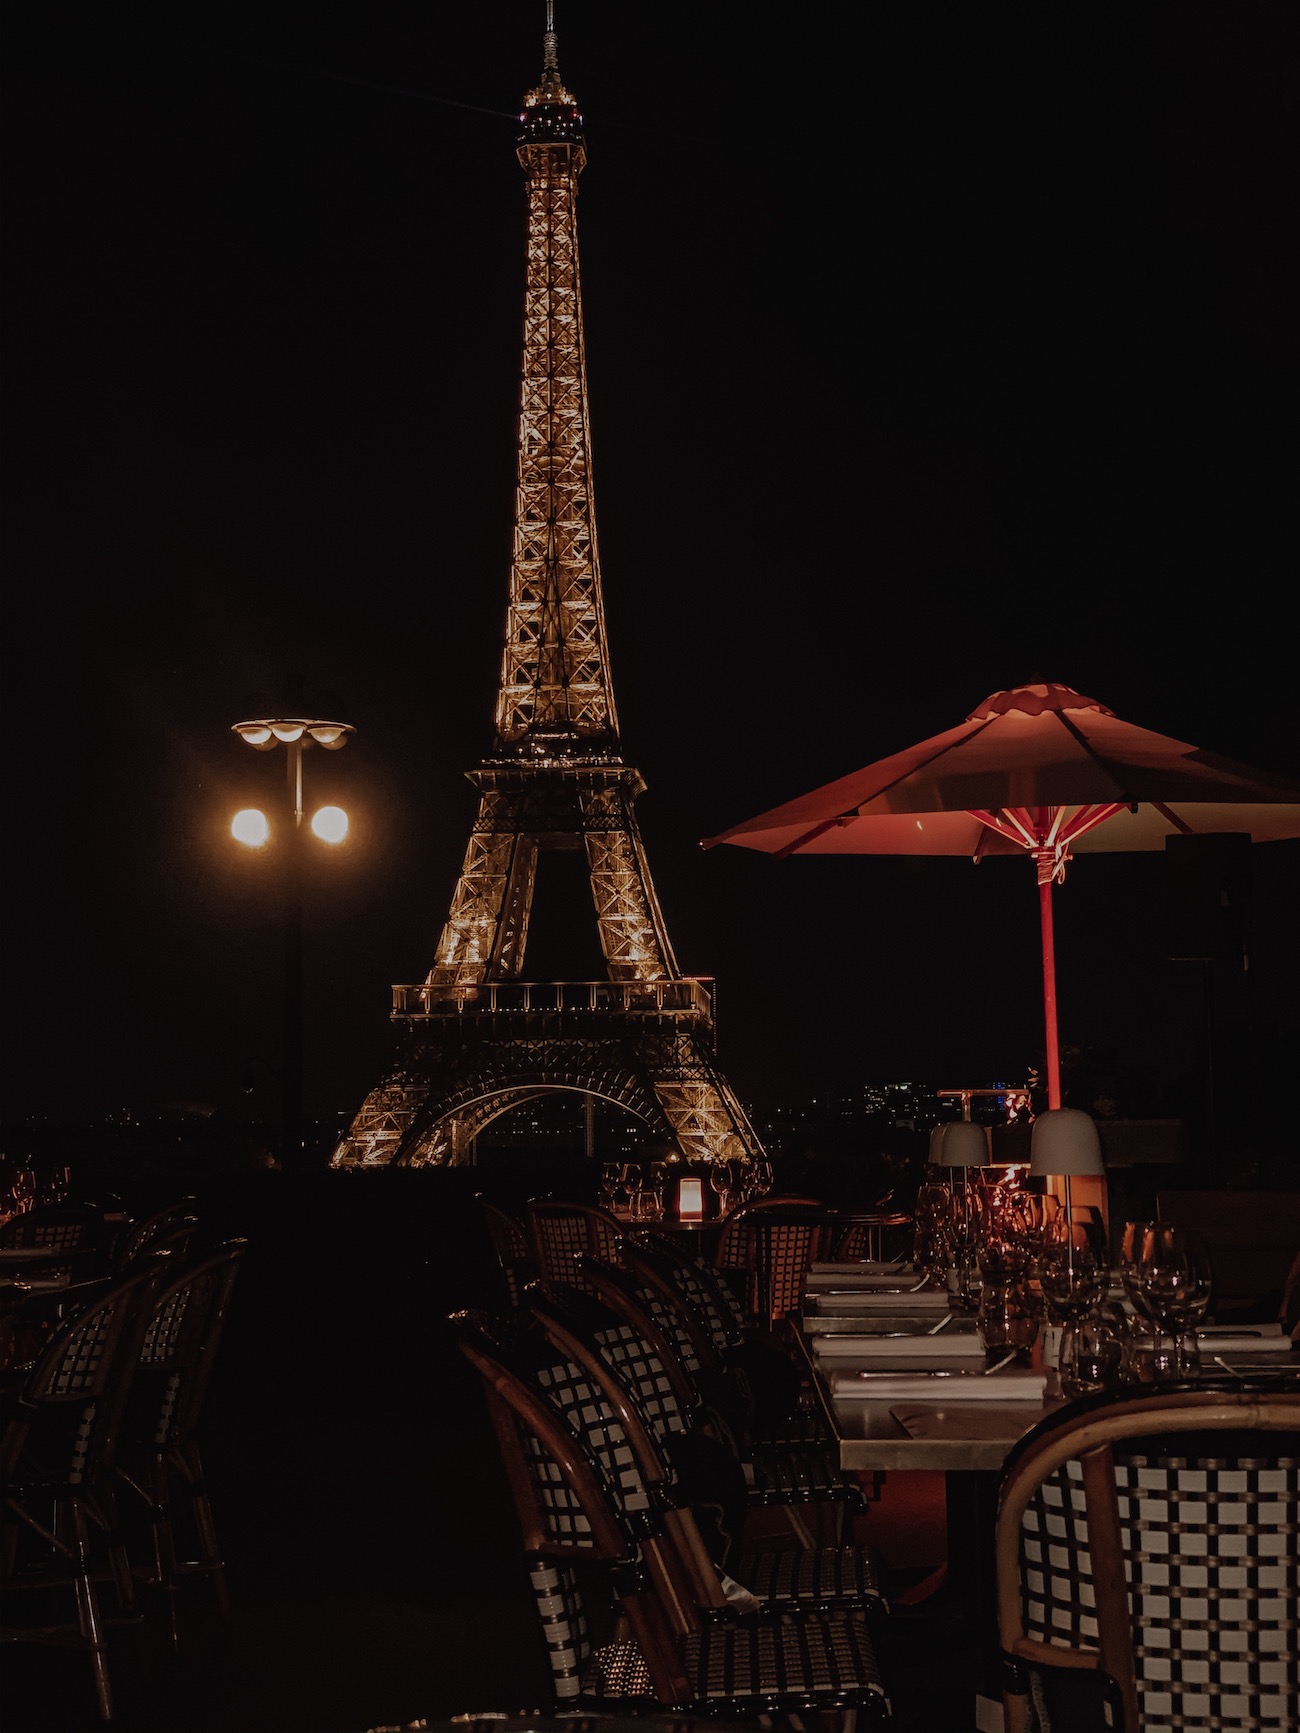 Paris, France | Eiffel Tower Views | Fun Facts About The Eiffel Tower | Blondie in the City by Hayley Larue 